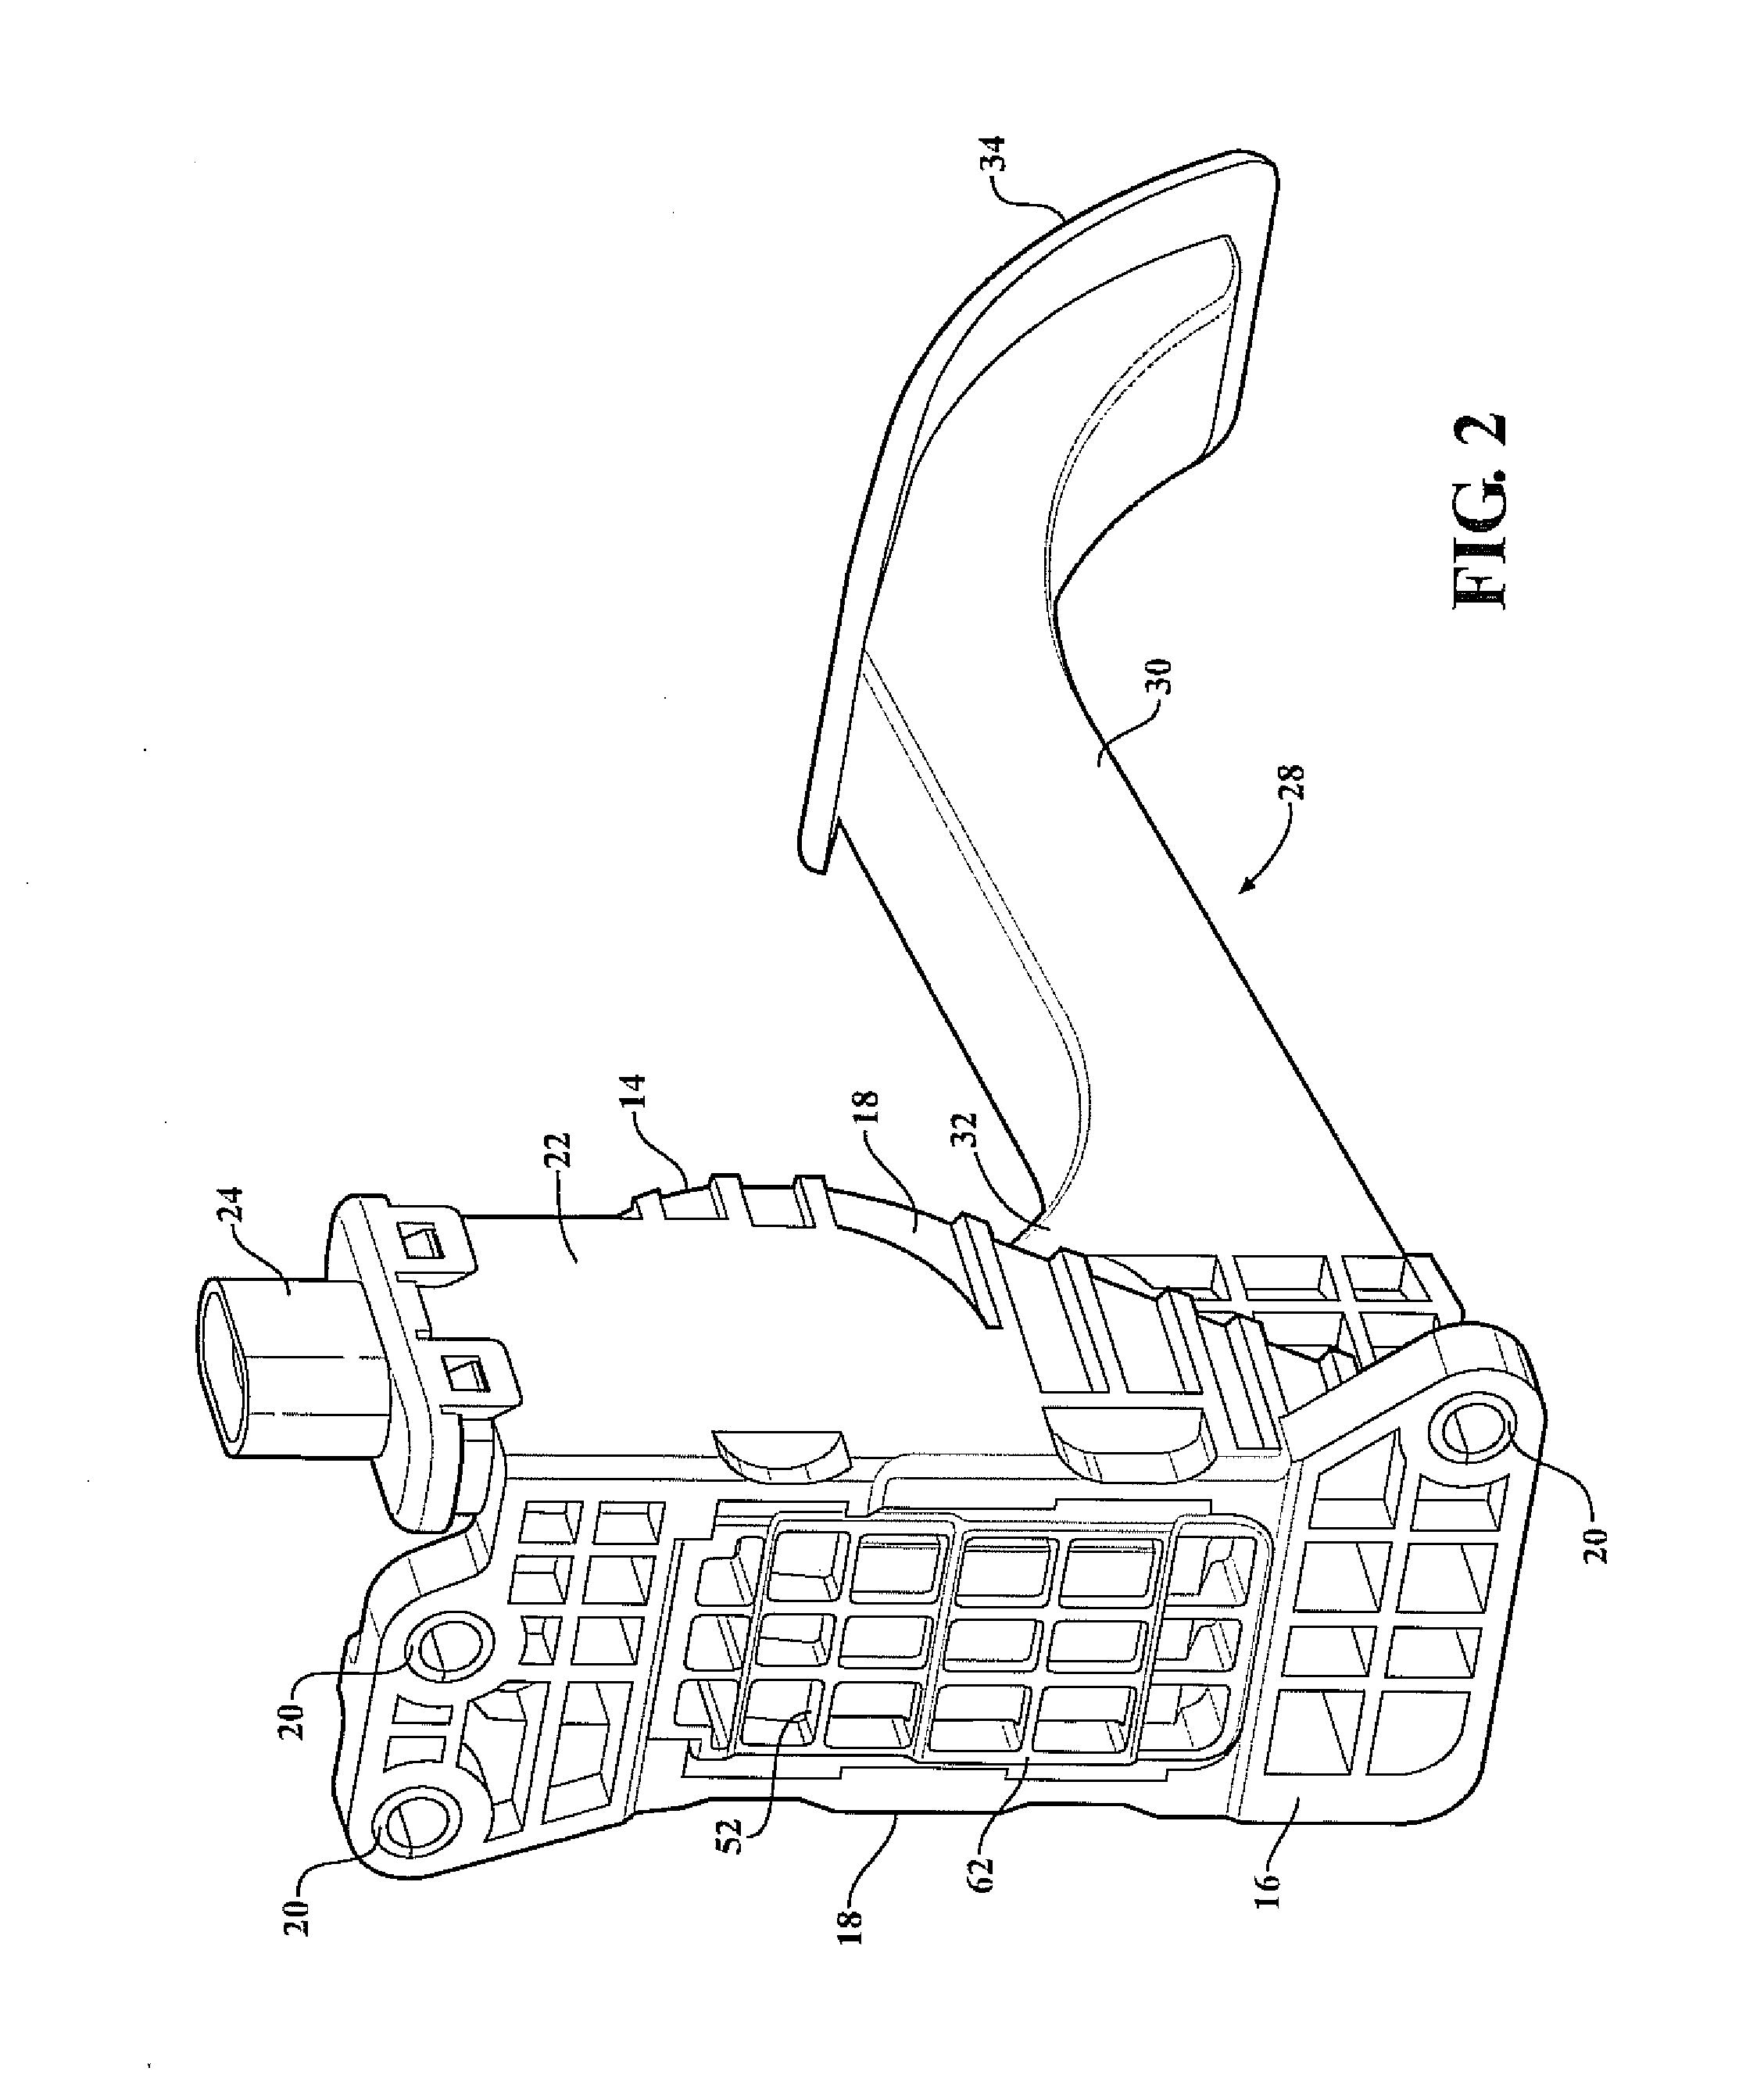 Electronic throttle control pedal assembly with hysteresis